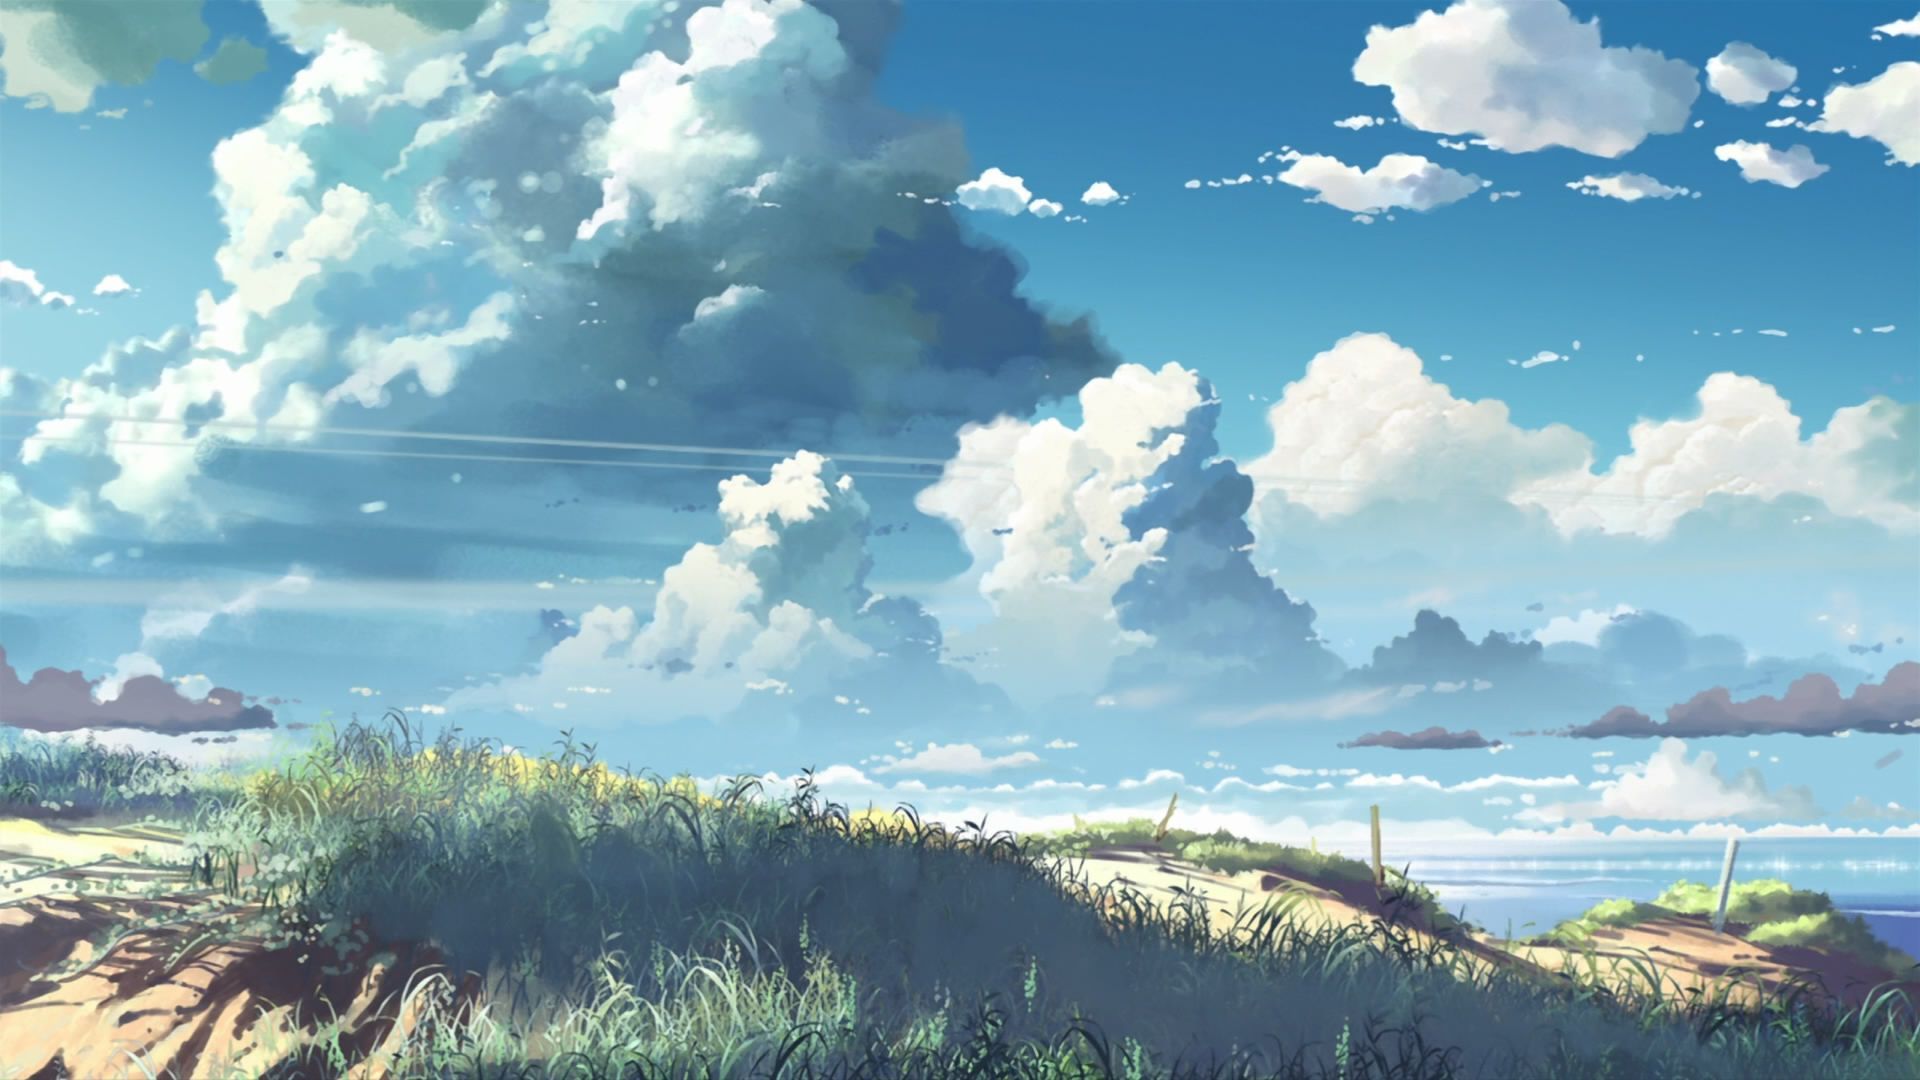 Nature Anime Scenery Background Wallpaper. Anime scenery, Anime scenery wallpaper, Scenery wallpaper